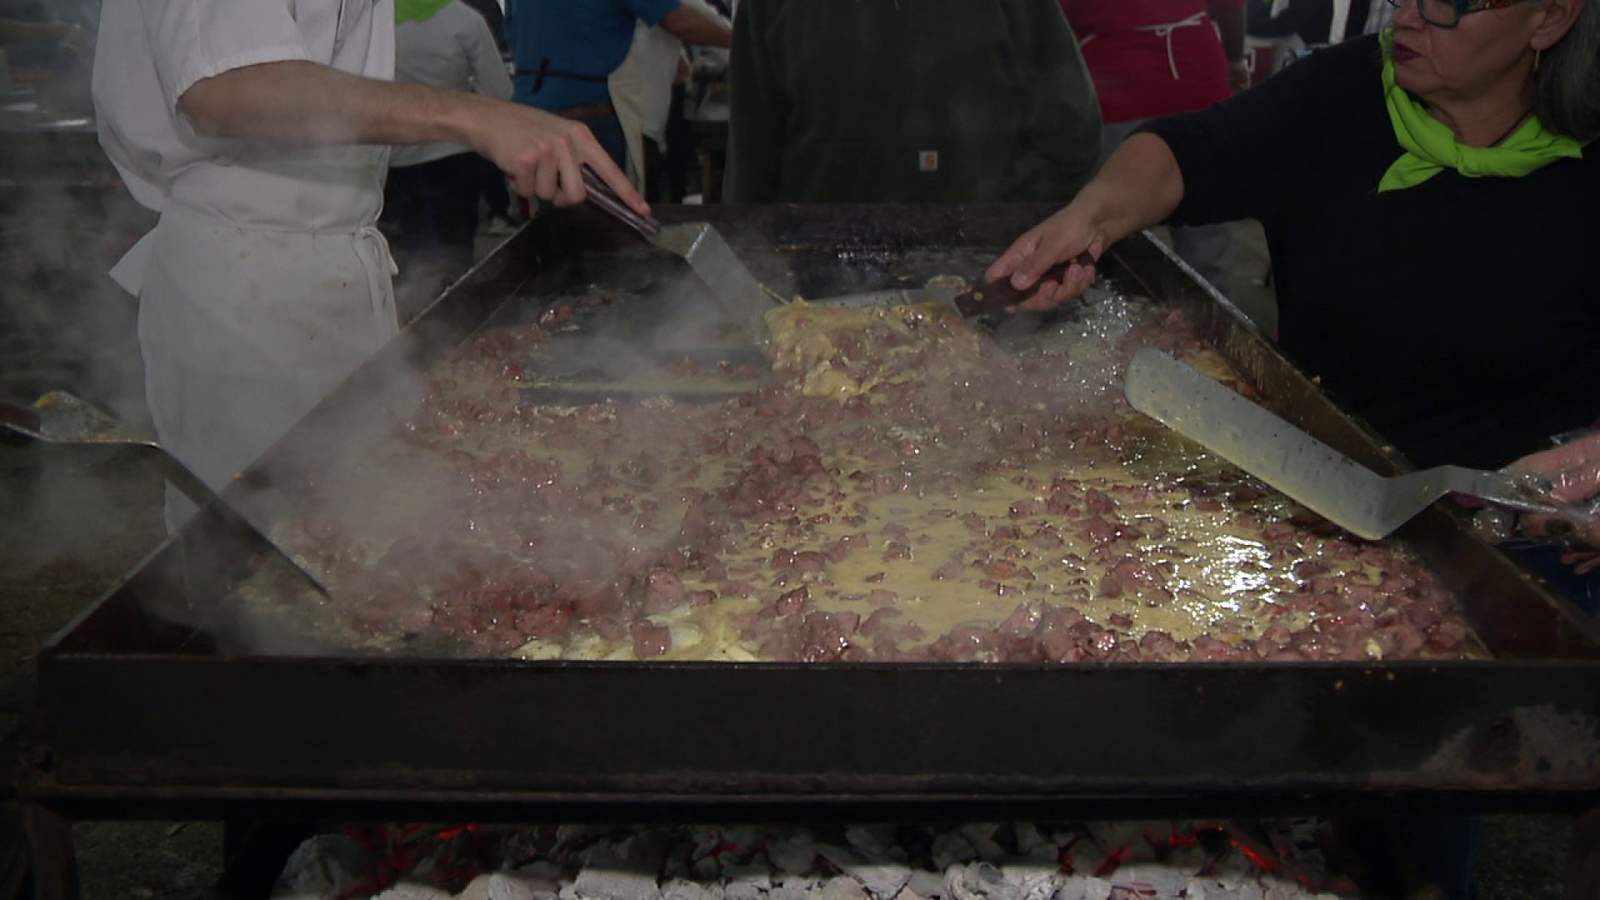 Thousands wake up early for free tacos at Cowboy Breakfast